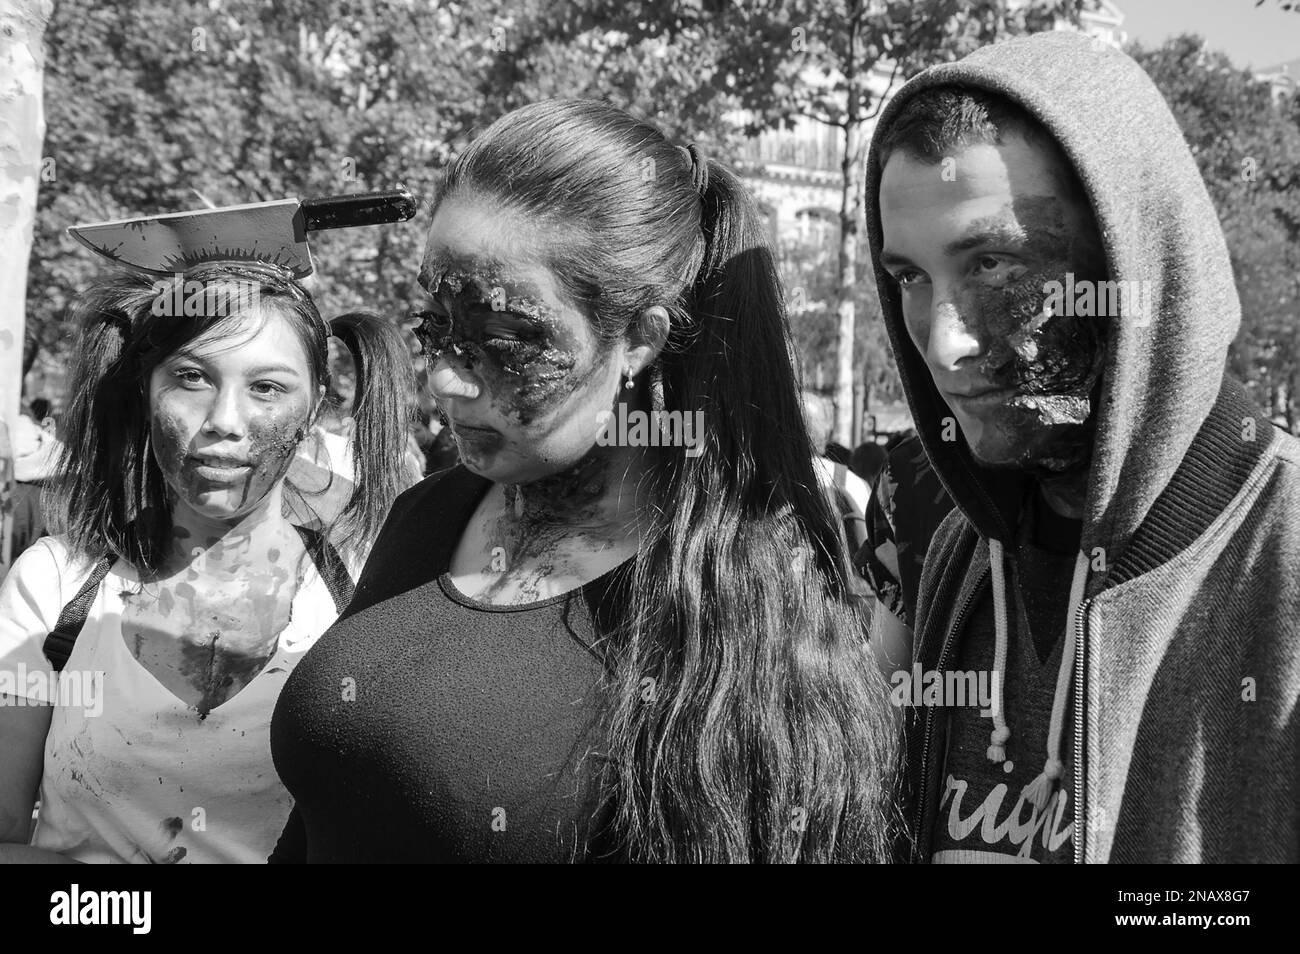 PARIS, FRANCE - OCTOBER 3, 2015: Three young people participating in Zombie parade at Place de la Republique (one of them with knife in head). Zombie Stock Photo